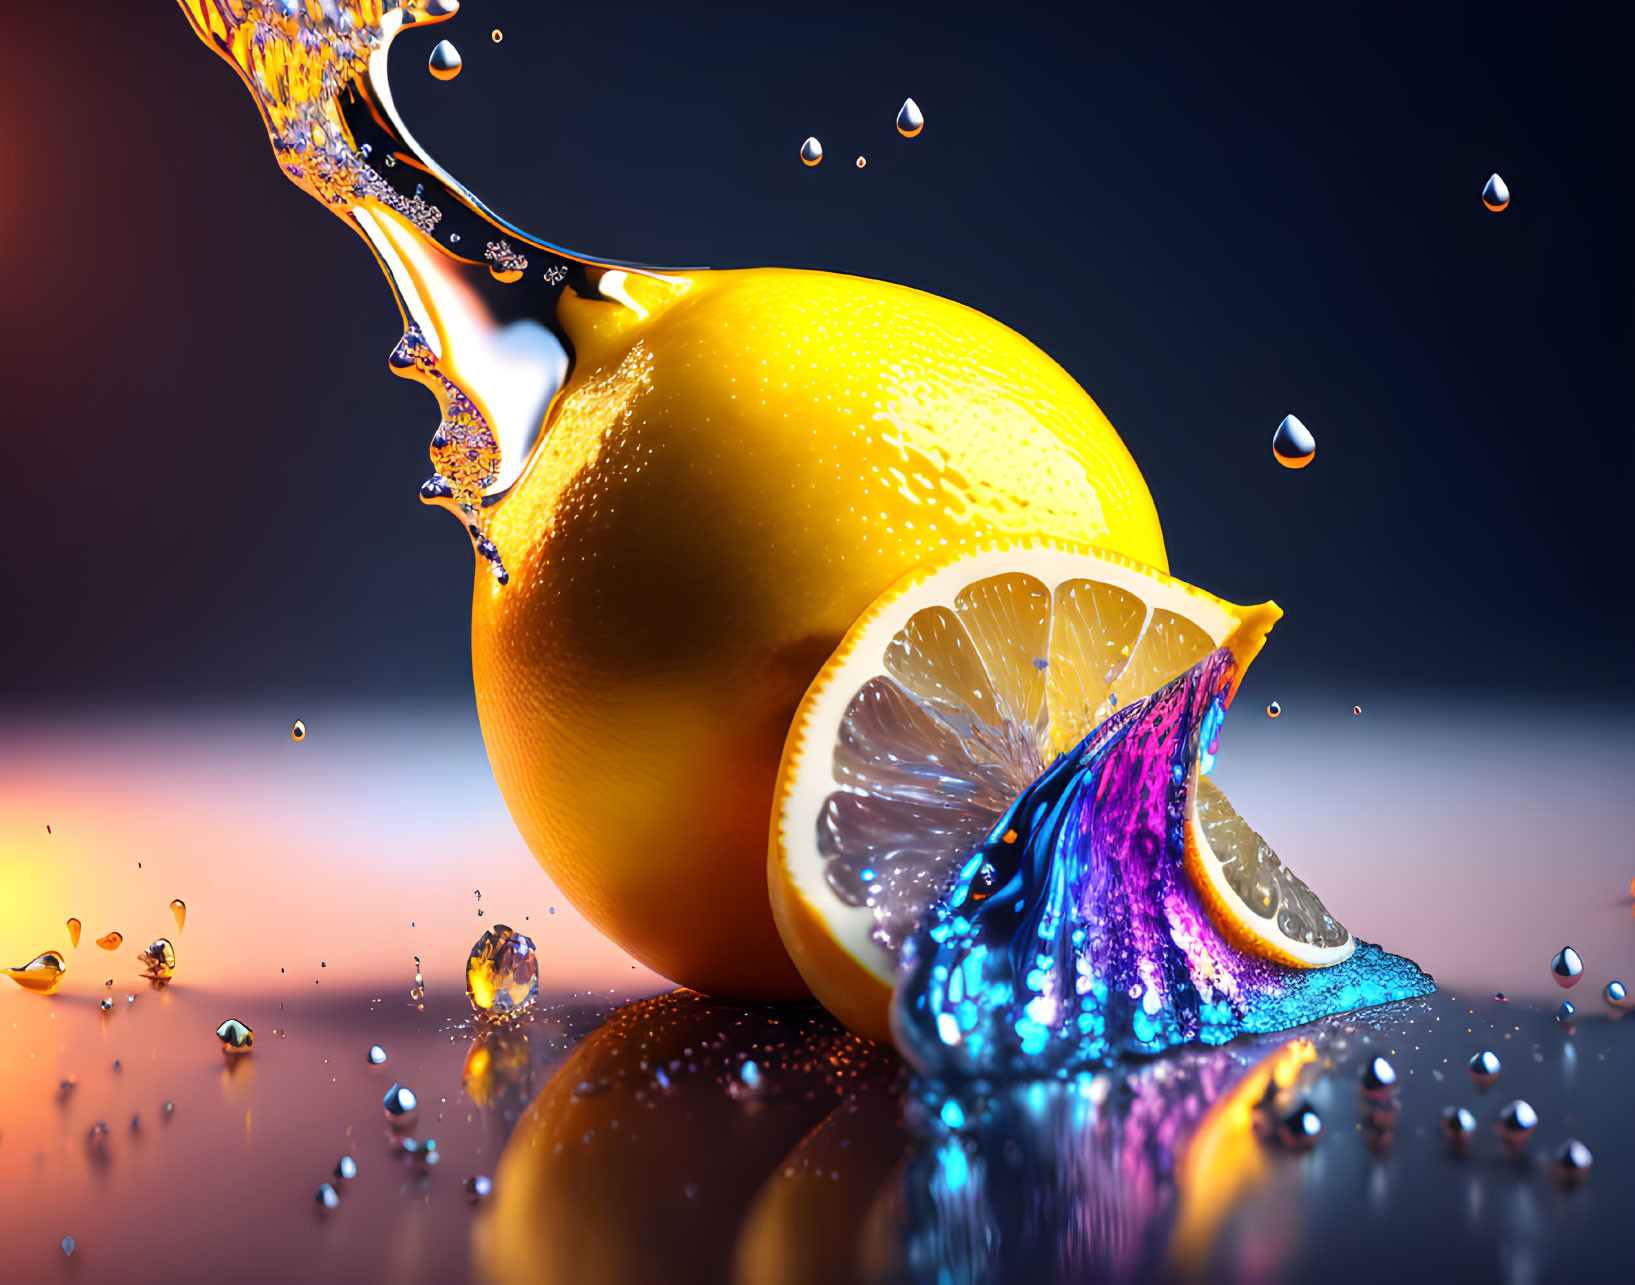 Colorful liquid splash with suspended droplets and lemon reflection.